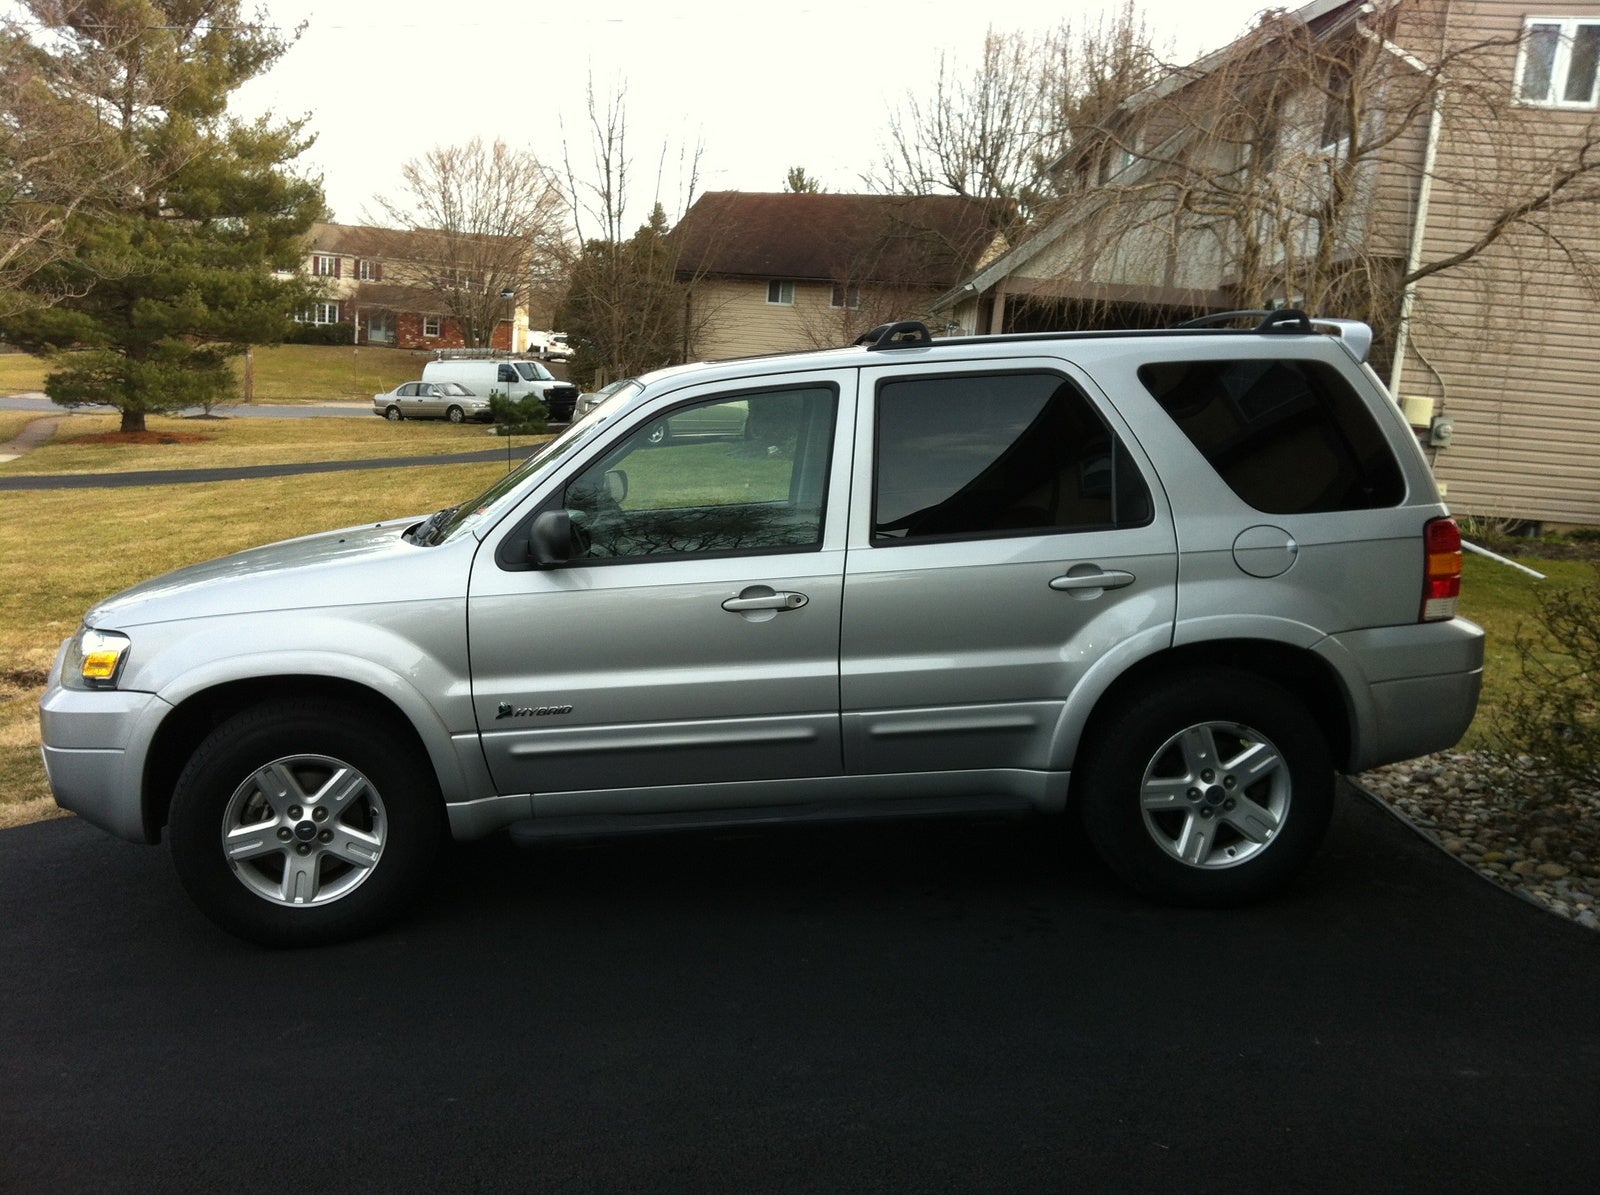 2006 Ford Escape Hybrid - Pictures - CarGurus